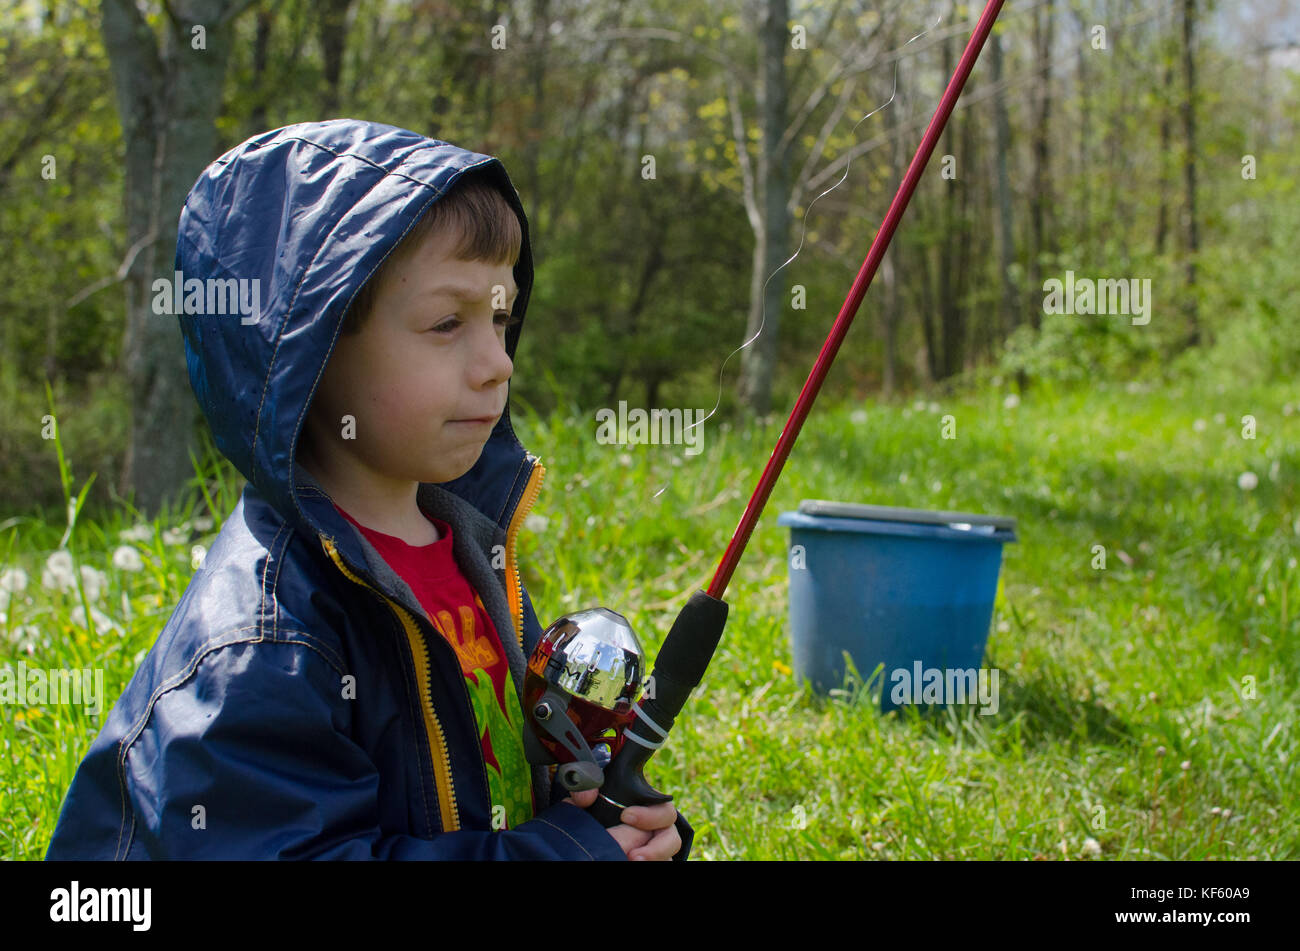 5-6 year old boy fishing by a pond in summer Stock Photo - Alamy